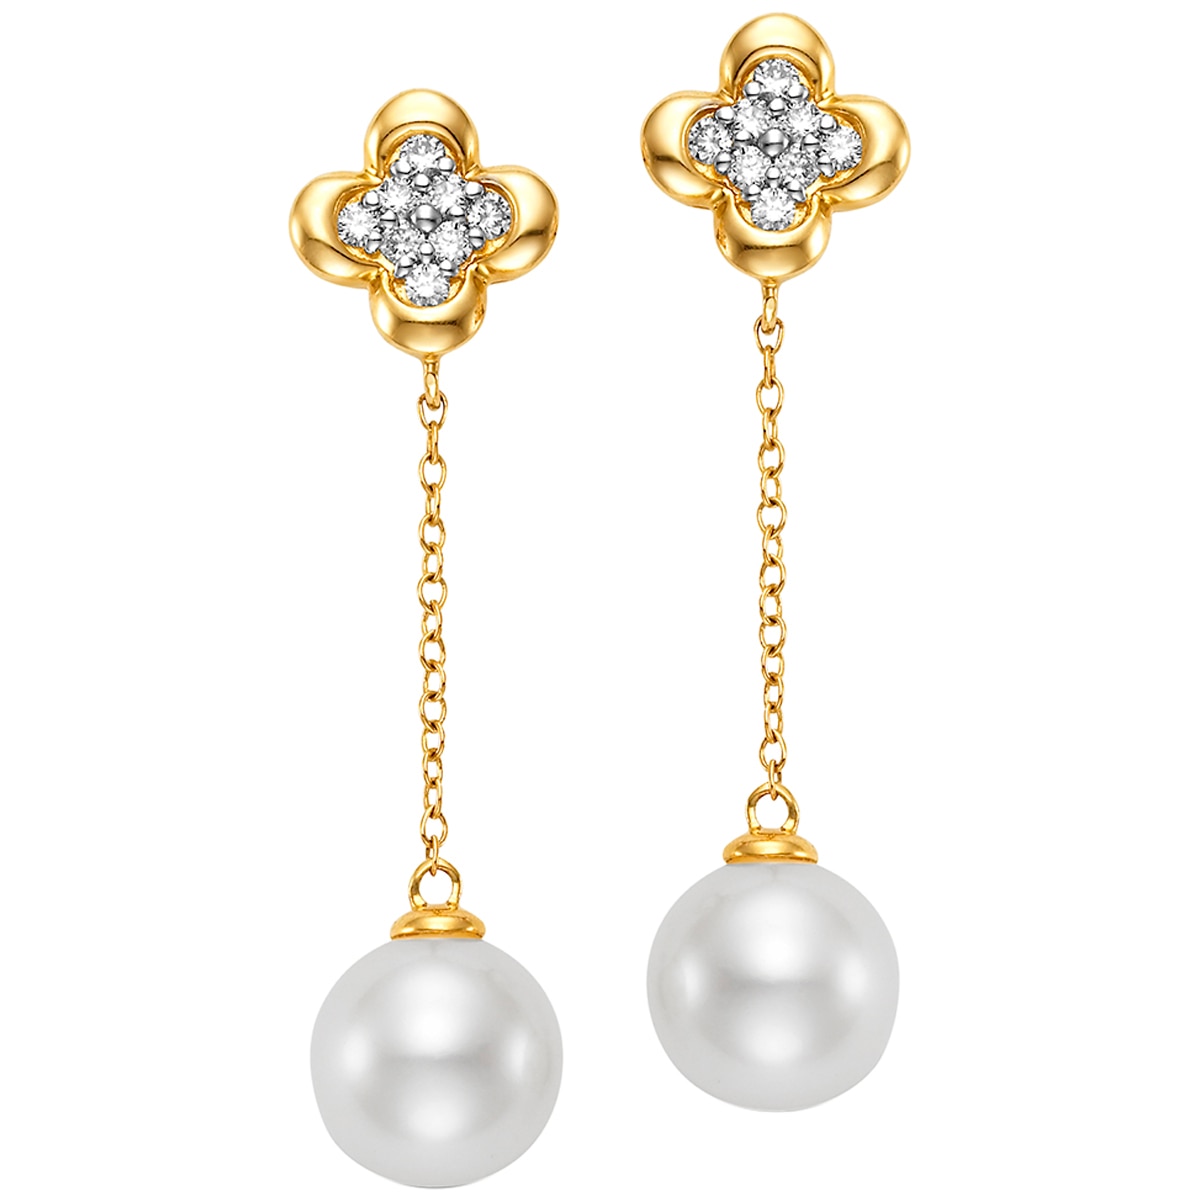 18KT Yellow Gold White Freshwater Pearl and Diamond Earrings - in depot